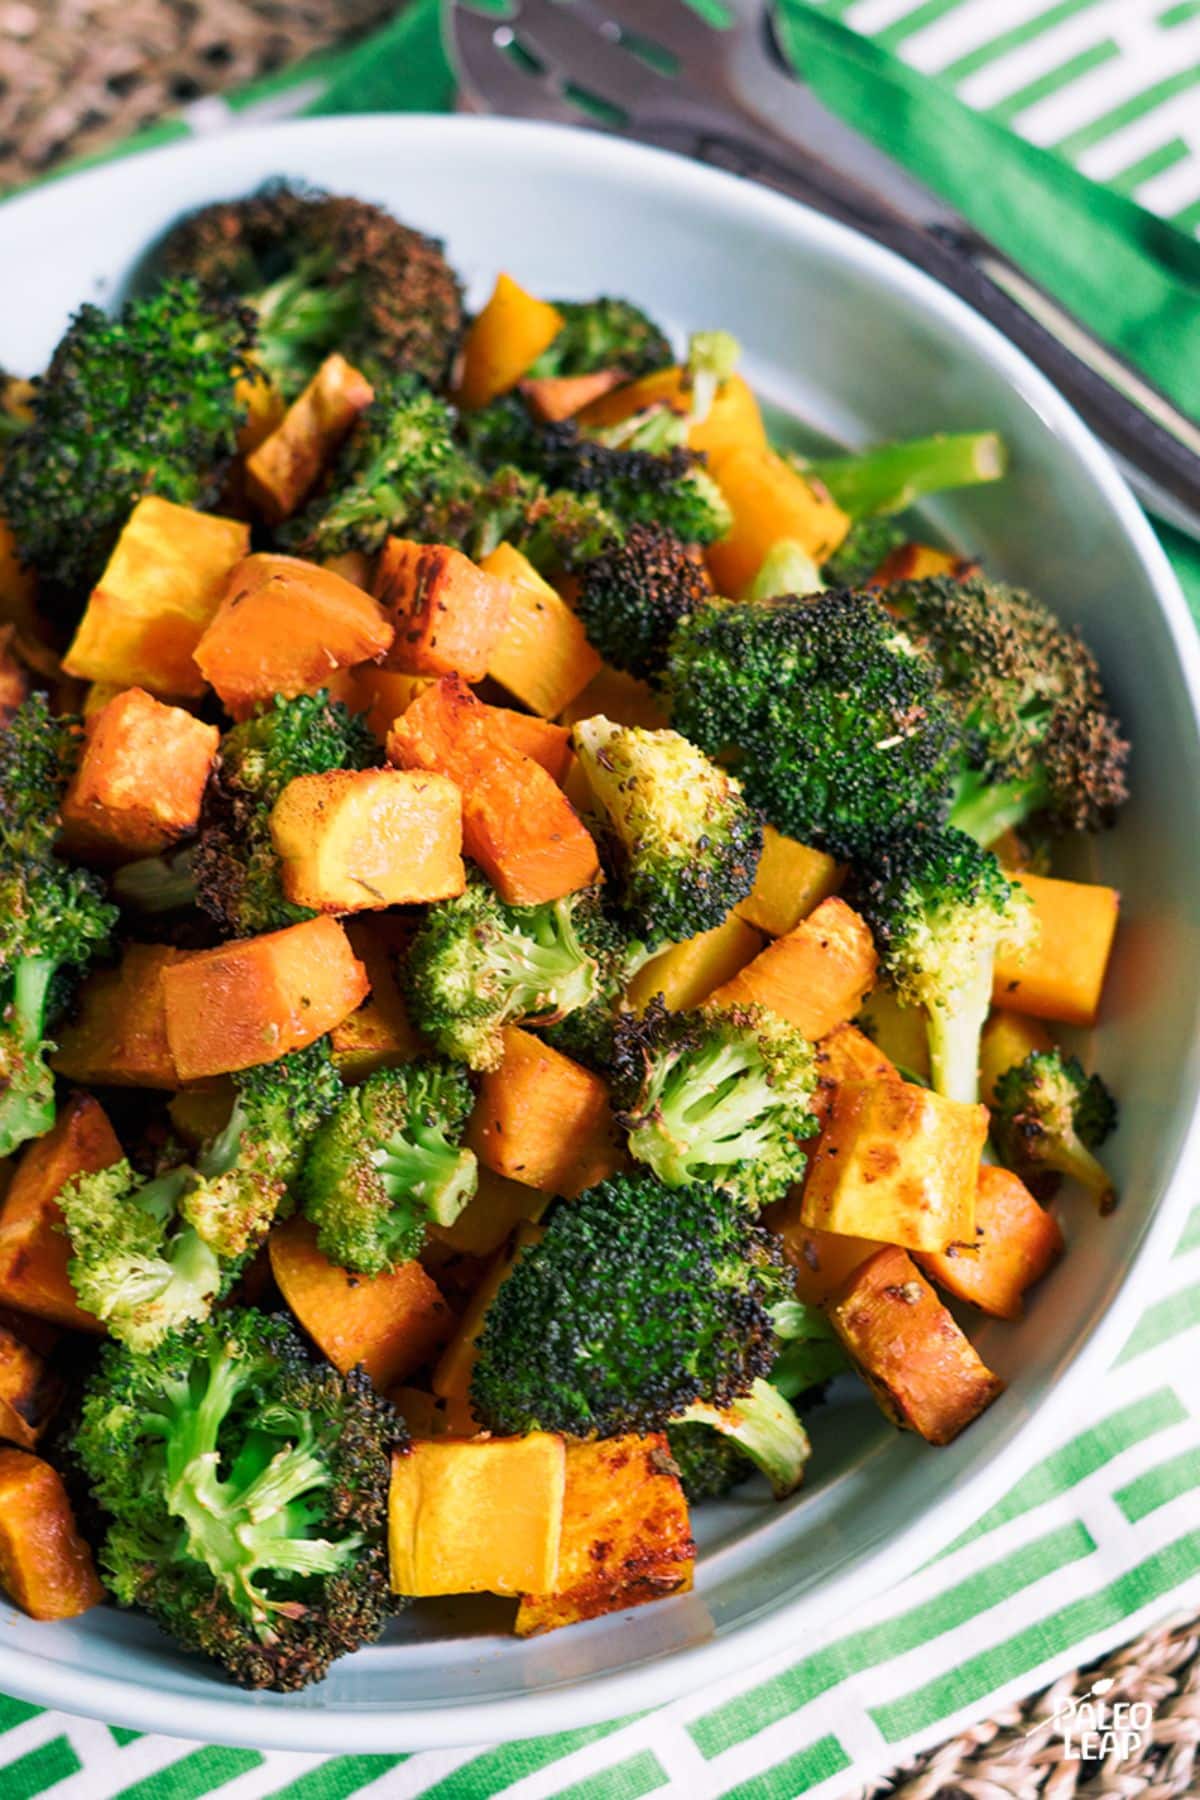 Oven Roasted Broccoli And Squash